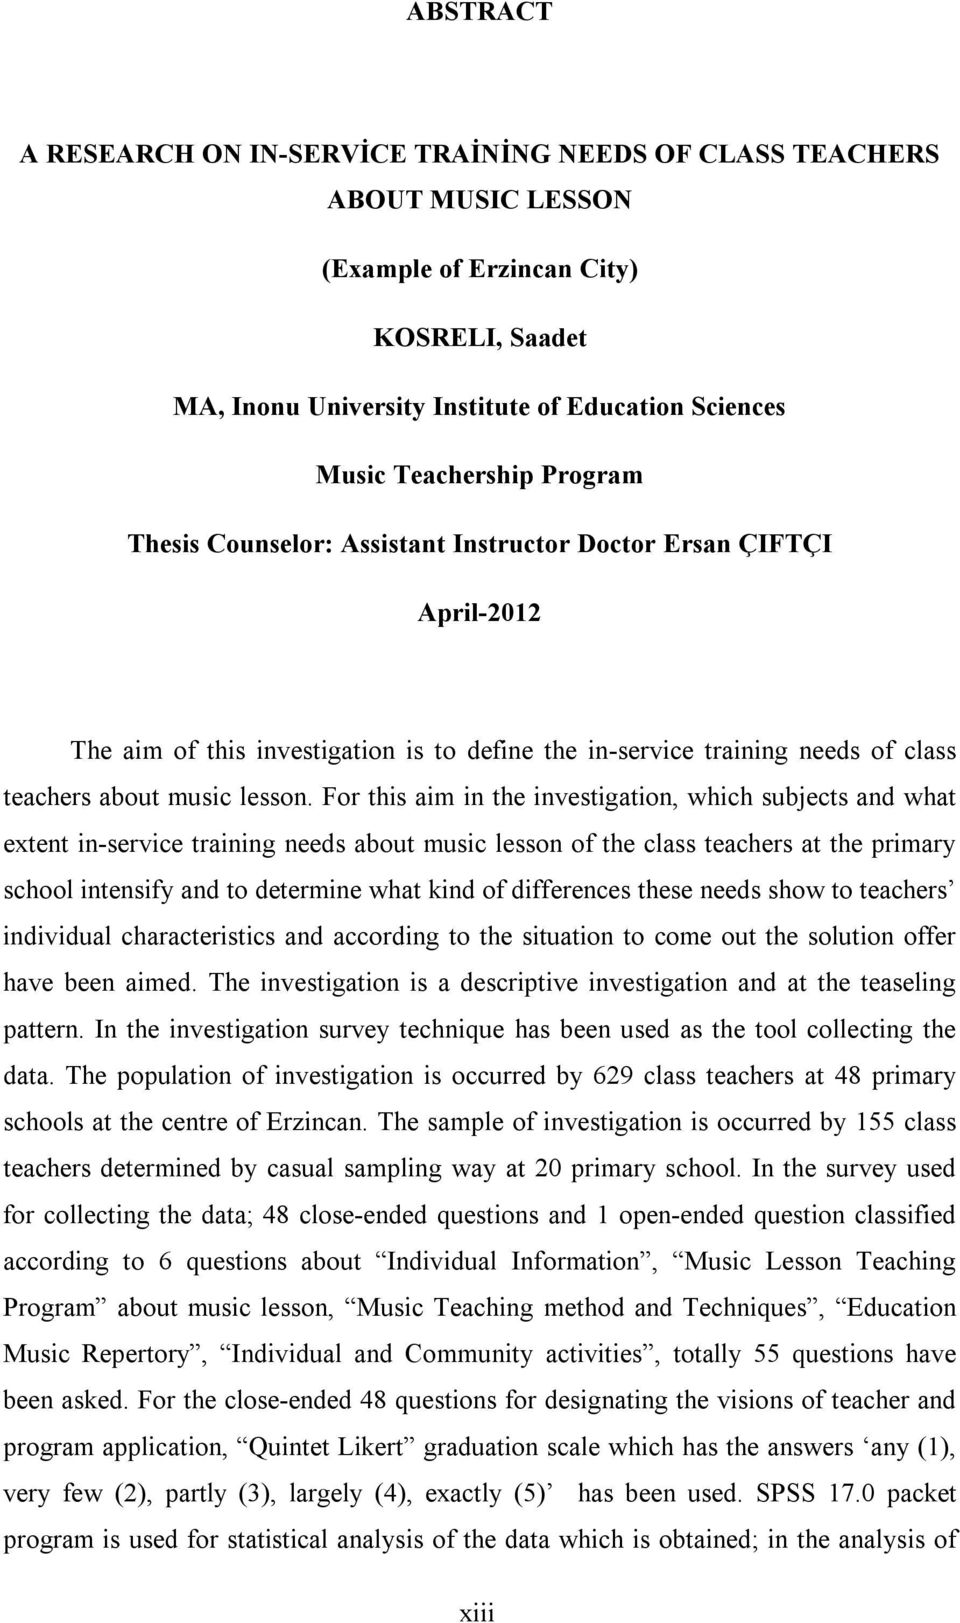 For this aim in the investigation, which subjects and what extent in-service training needs about music lesson of the class teachers at the primary school intensify and to determine what kind of